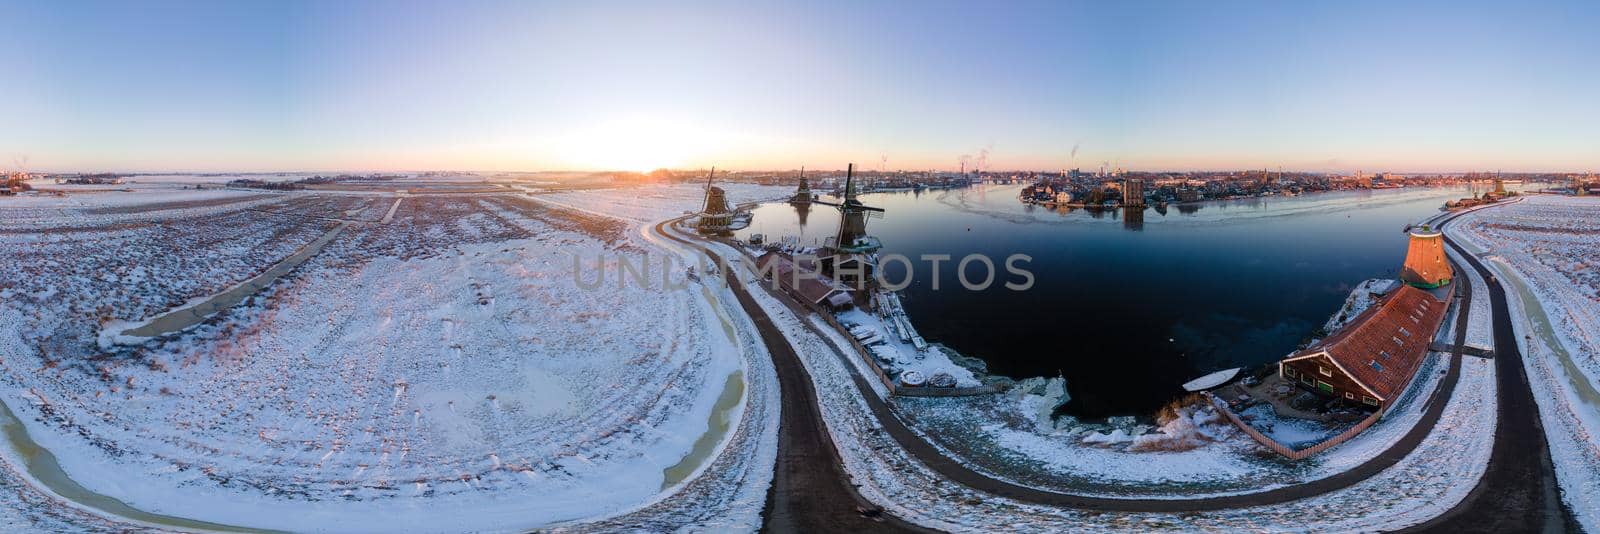 panoramic view over the Zaanse Schans windmill village snow covered during winter, Zaanse Schans wind mills historical wooden mills in the Netherlands by fokkebok